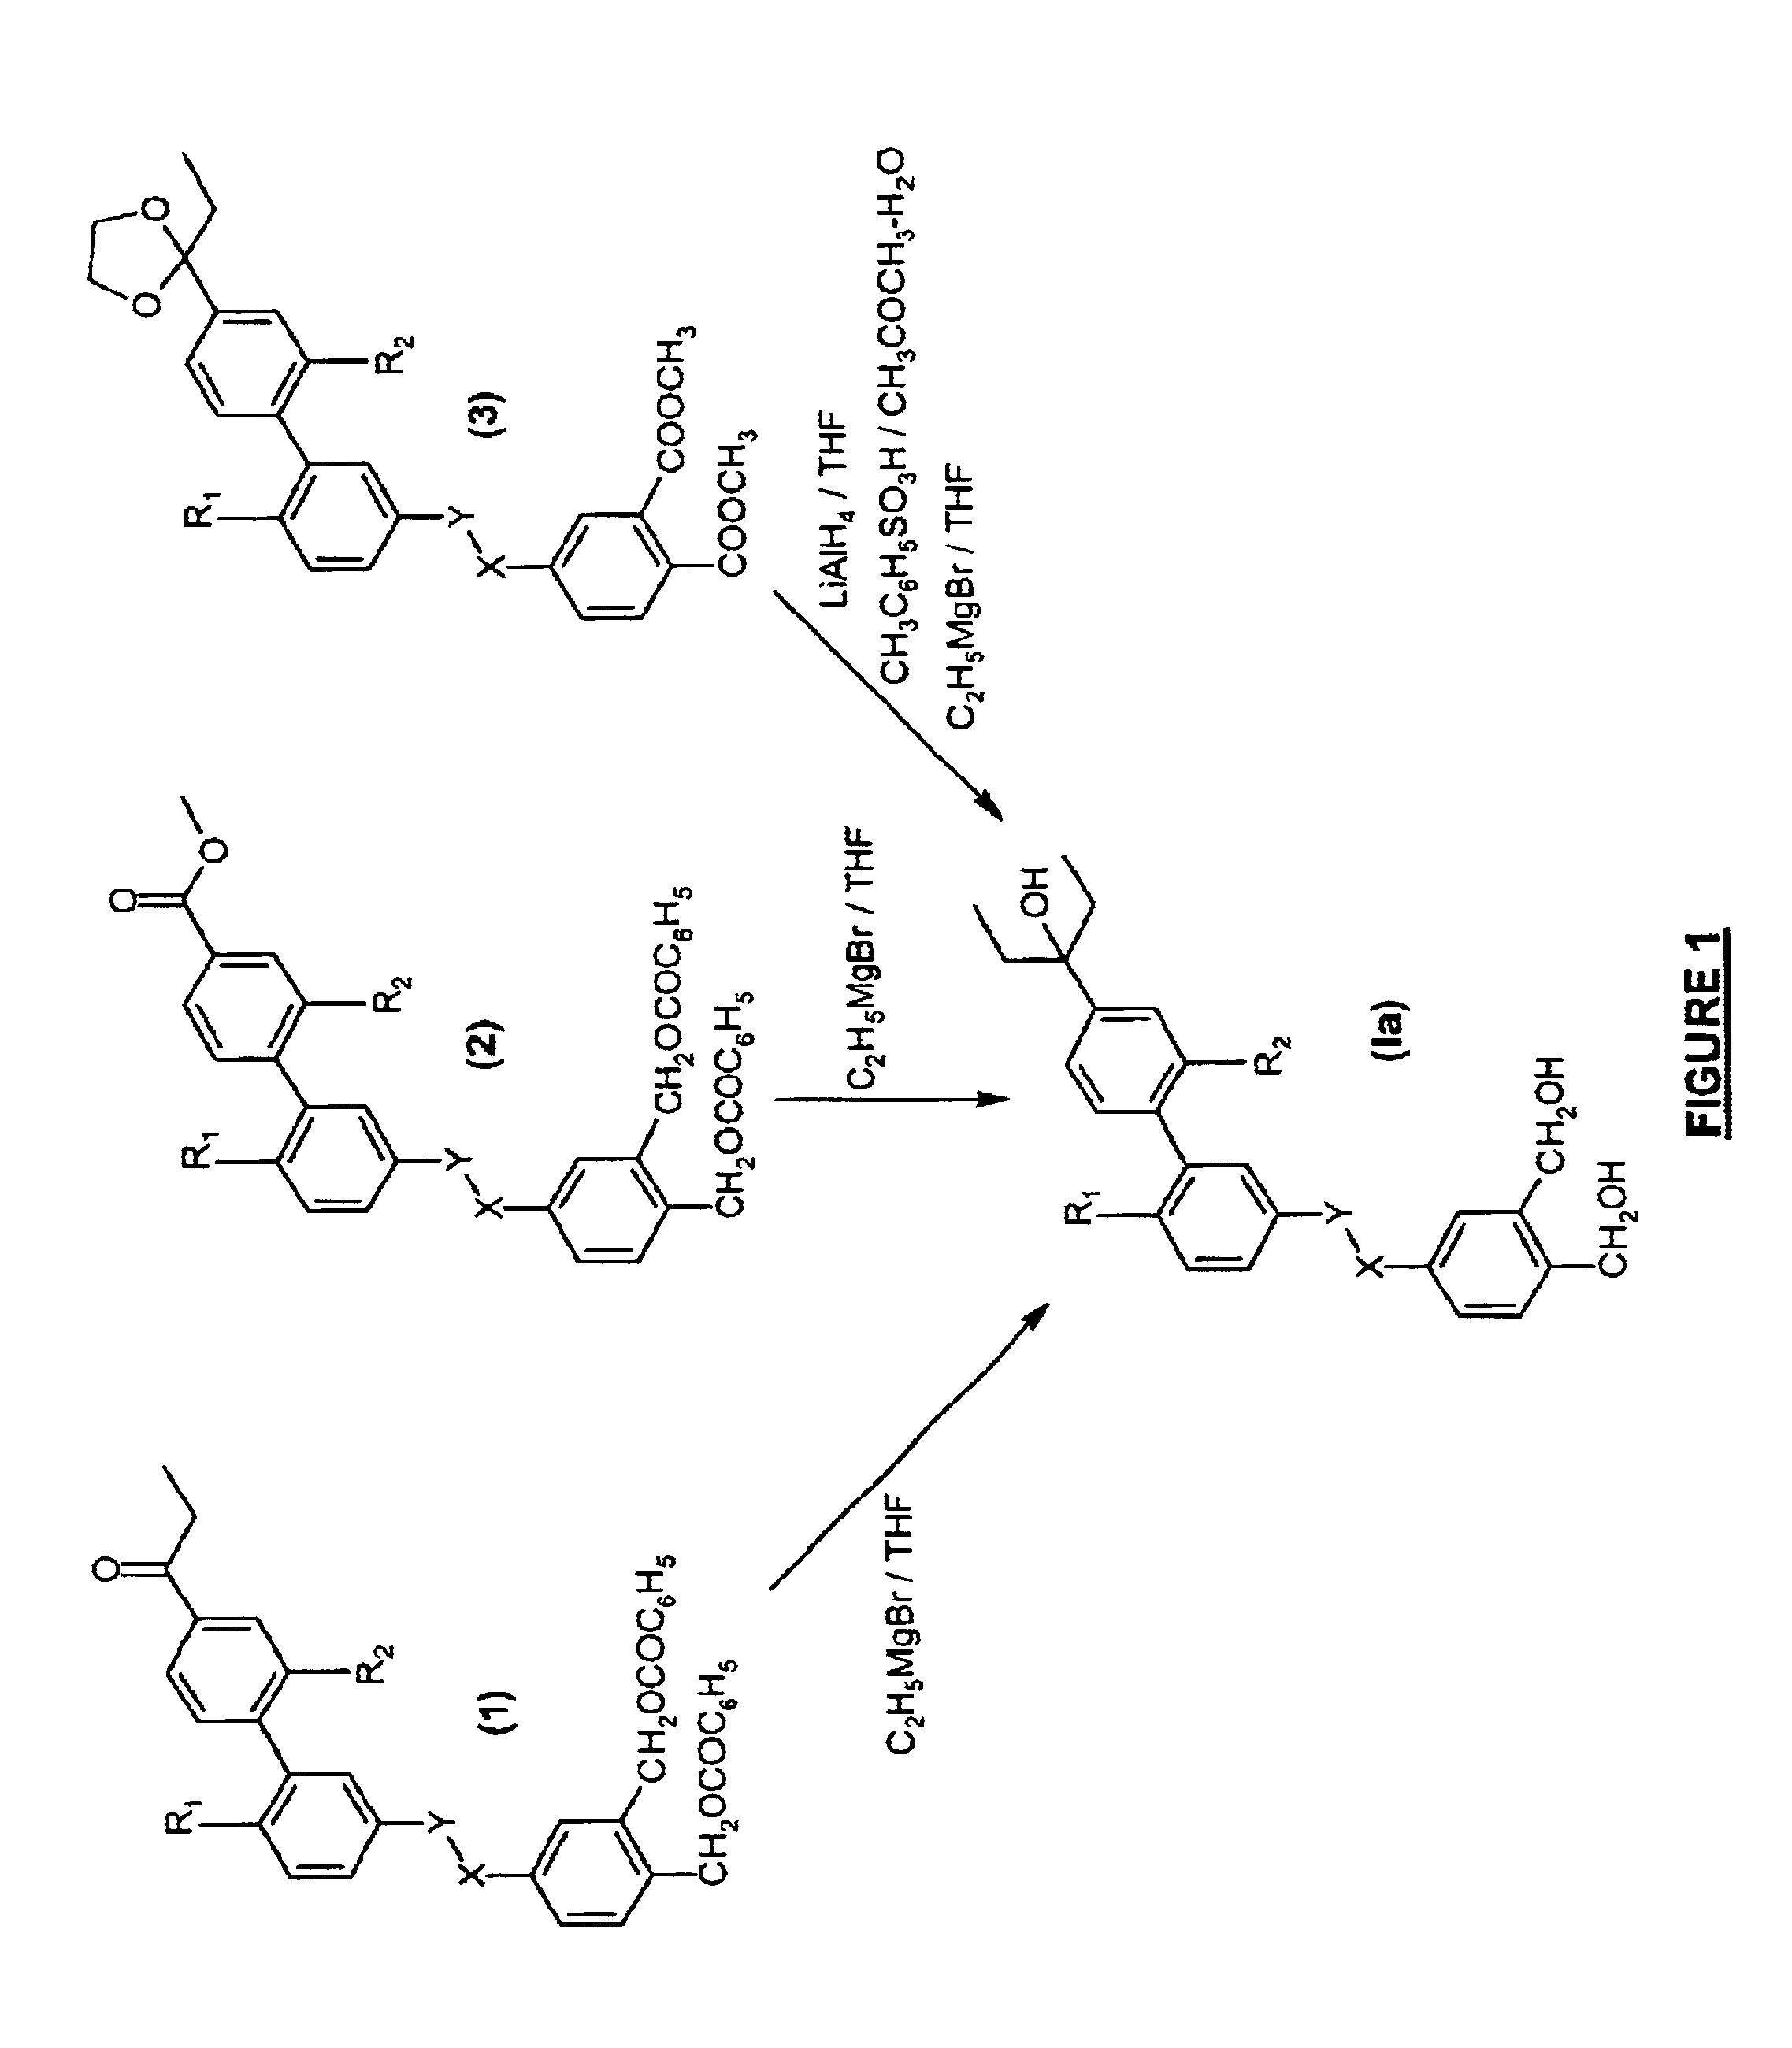 Triaromatic vitamin D analogues